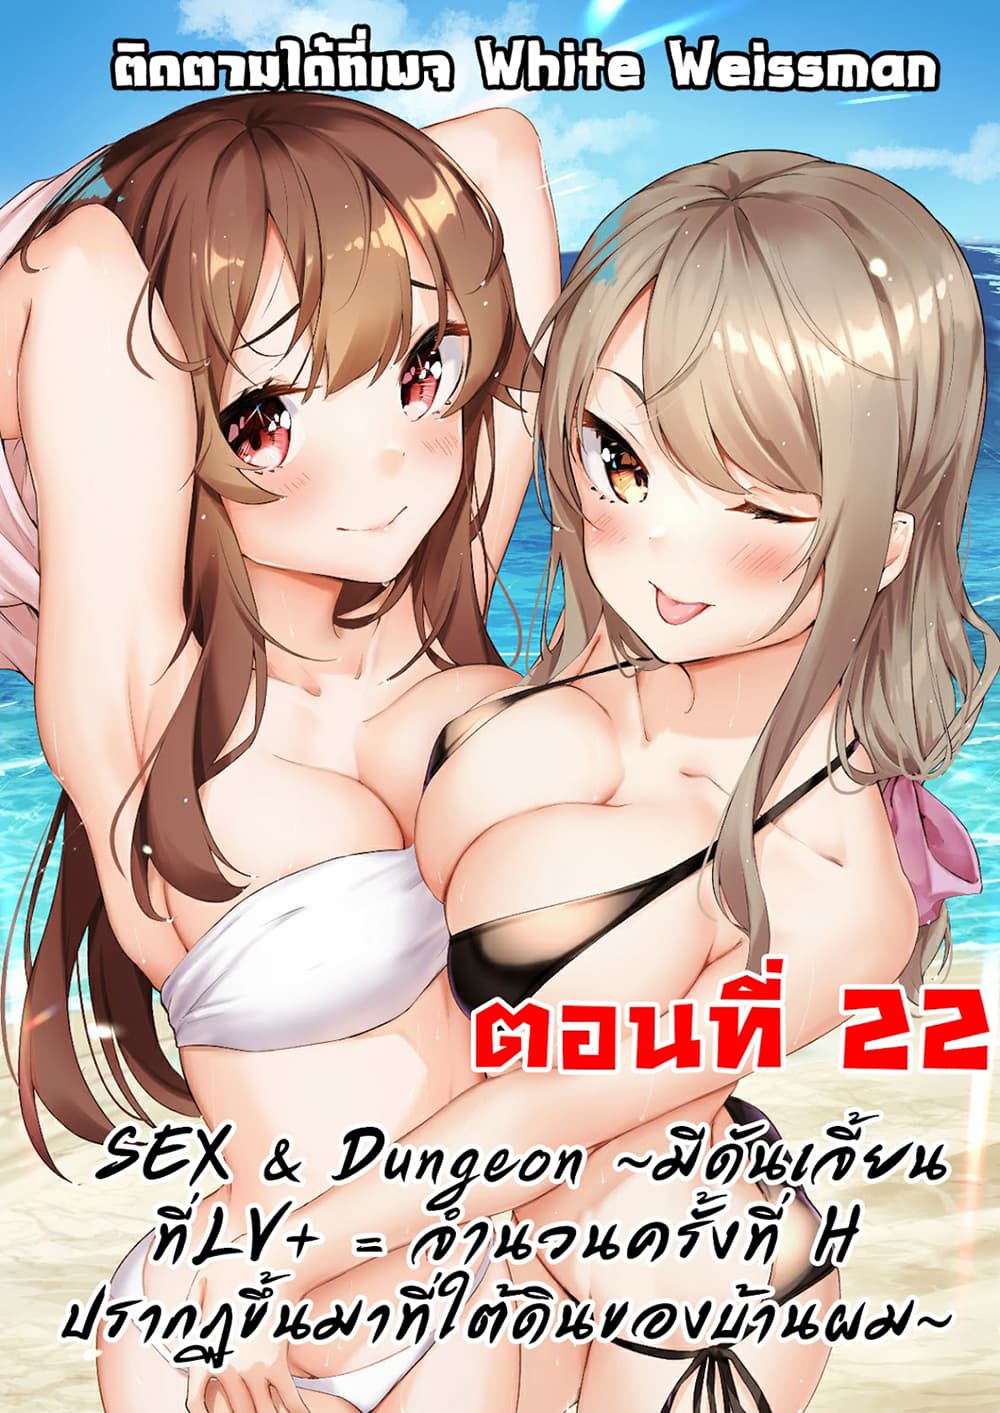 Sex and Dungeon 22 01